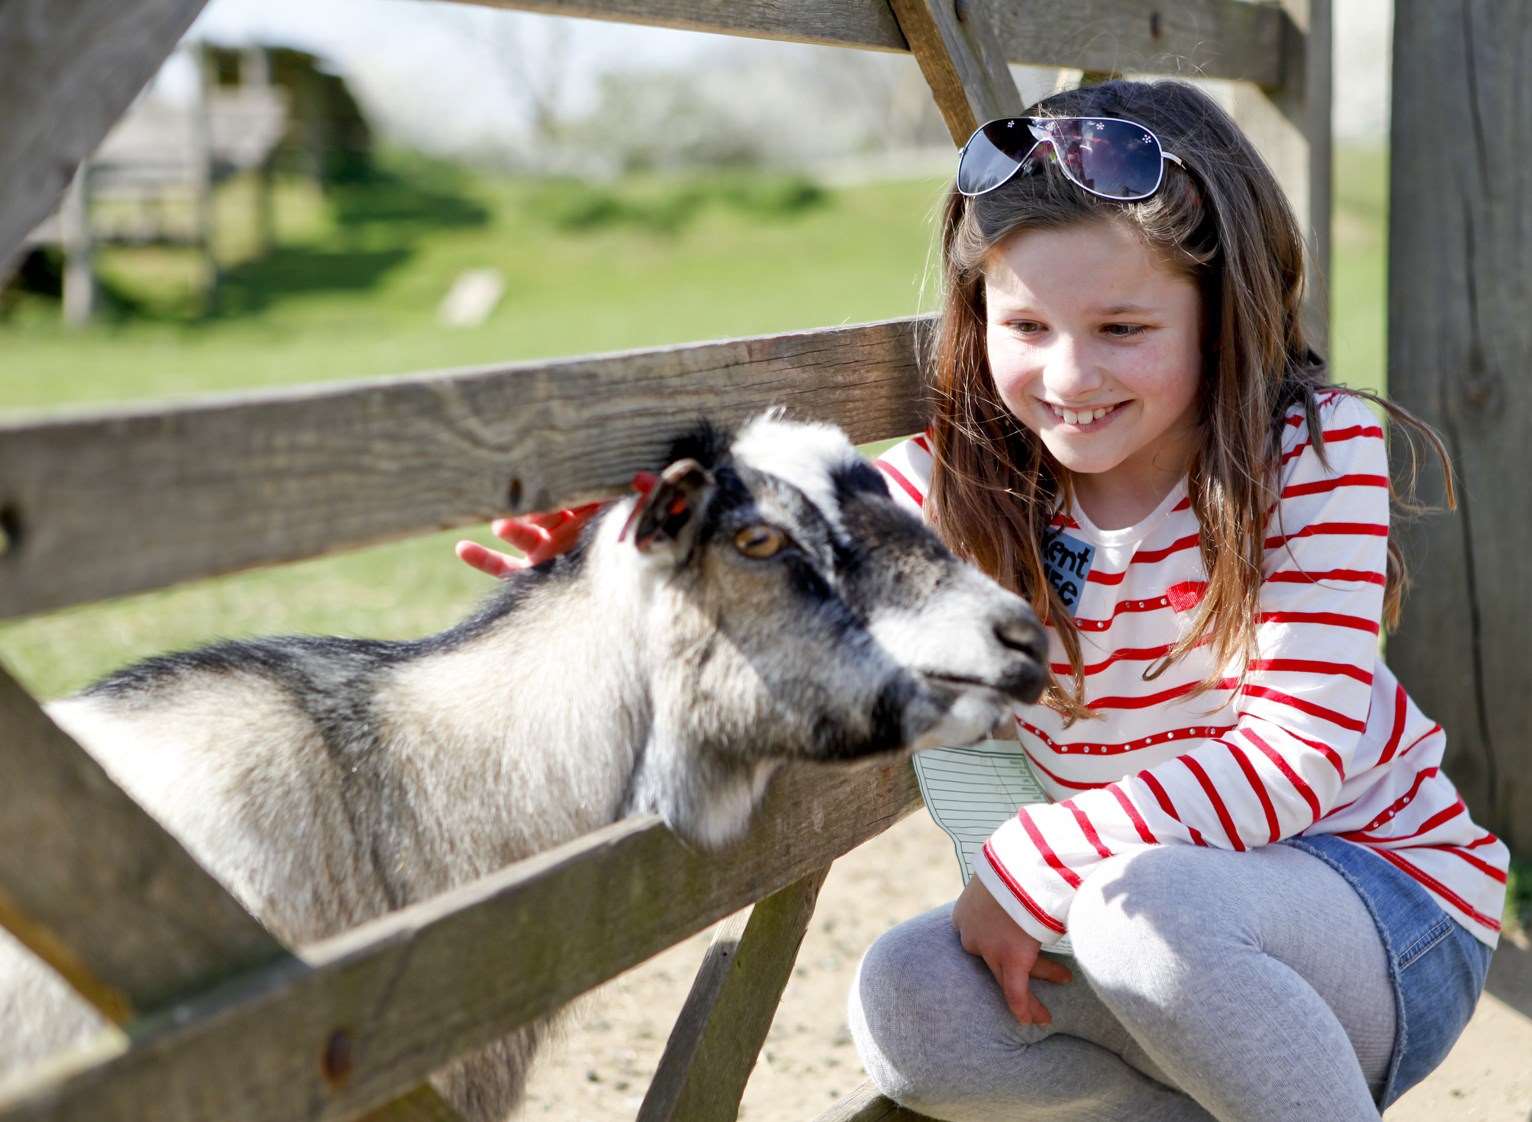 Celebrate your birthday at Kent Life near Maidstone. Picture: Leah Edwards